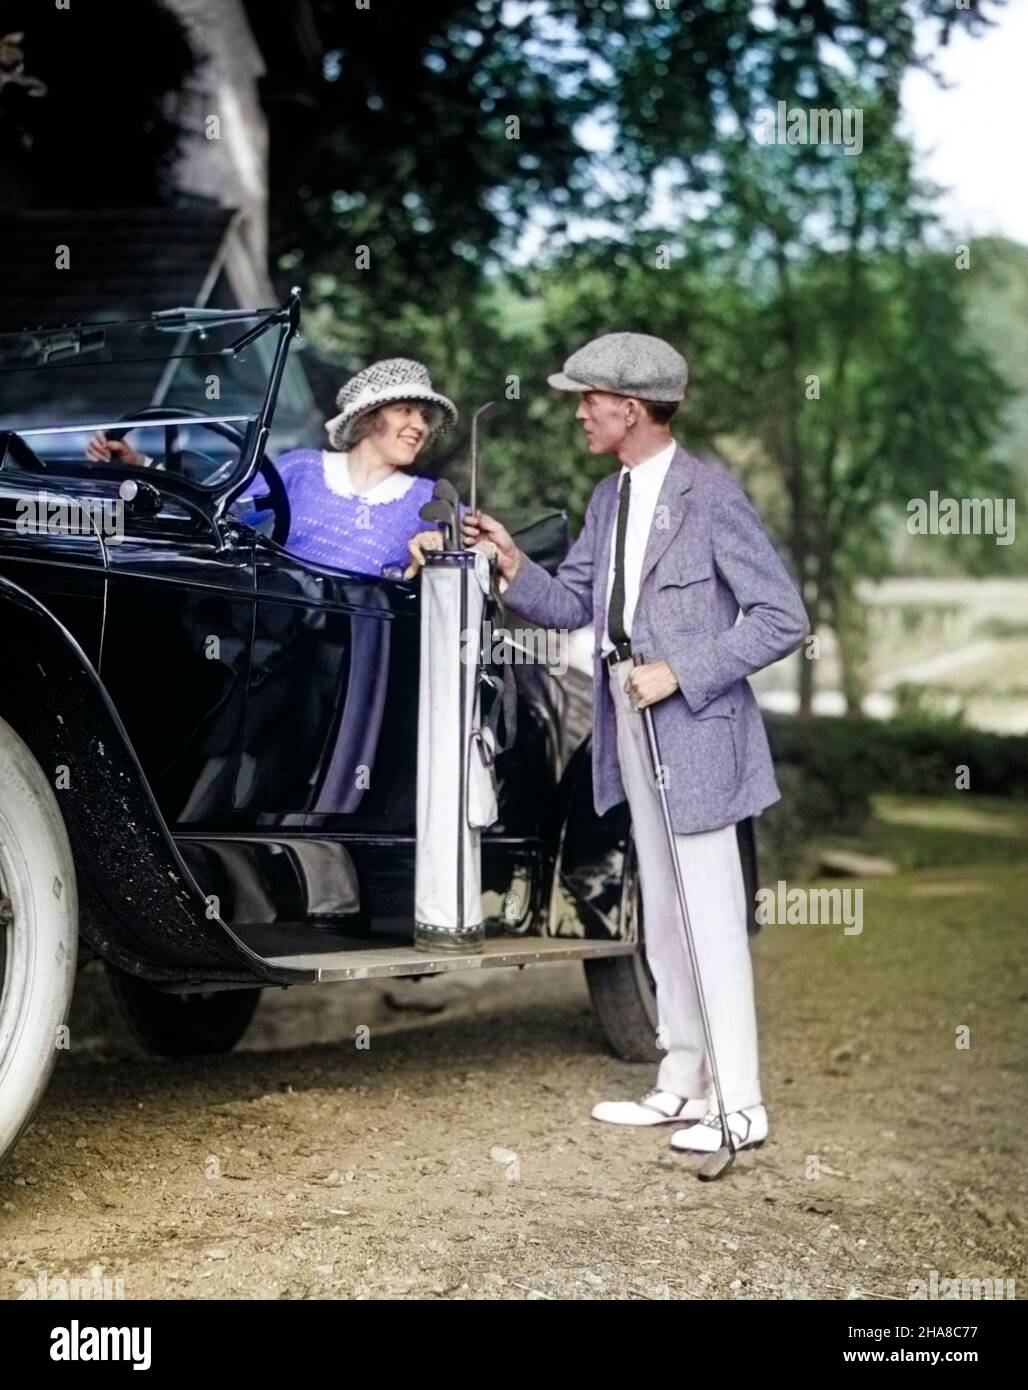 1920s COUPLE WOMAN MAN RESTING GOLF CLUB BAG ON 1922 LINCOLN CONVERTIBLE RUNNING BOARD UPSCALE COUNTRY CLUB GOLFING LIFESTYLE - m130c HAR001 HARS BEAUTY SUBURBAN COLOR GOLFER OLD TIME BUSY NOSTALGIA LINCOLN OLD FASHION AUTO FITNESS STYLE VEHICLE SAFETY TEAMWORK ATHLETE FIT PLEASED JOY LIFESTYLE SATISFACTION FEMALES HUSBANDS HEALTHINESS TRANSPORT COPY SPACE FRIENDSHIP FULL-LENGTH LADIES PERSONS INSPIRATION AUTOMOBILE MALES GOLFING CONFIDENCE TRANSPORTATION RESTING CLUBS GOALS SUCCESS HAPPINESS ADVENTURE LEISURE STYLES MOTOR VEHICLE AUTOS EXCITEMENT RECREATION PRIDE OPPORTUNITY MOTORING SMILES Stock Photo